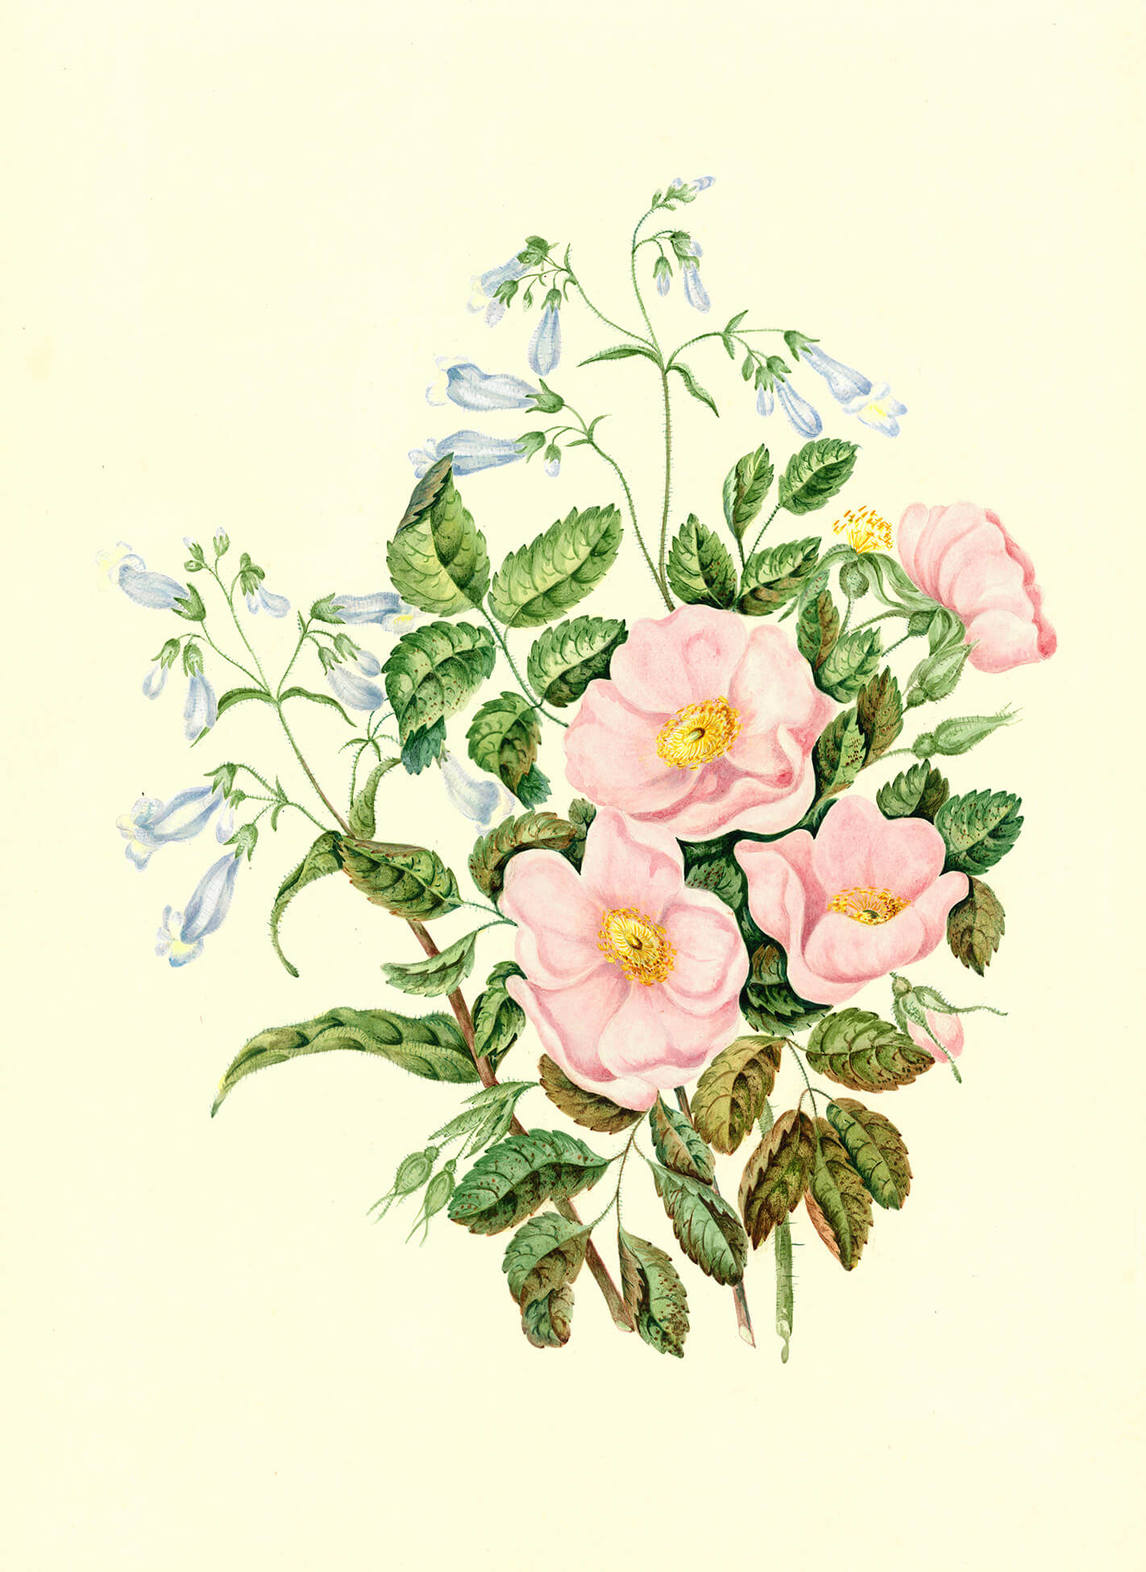 Penstemon pubescens, c.1863-65, by Agnes Chamberlin